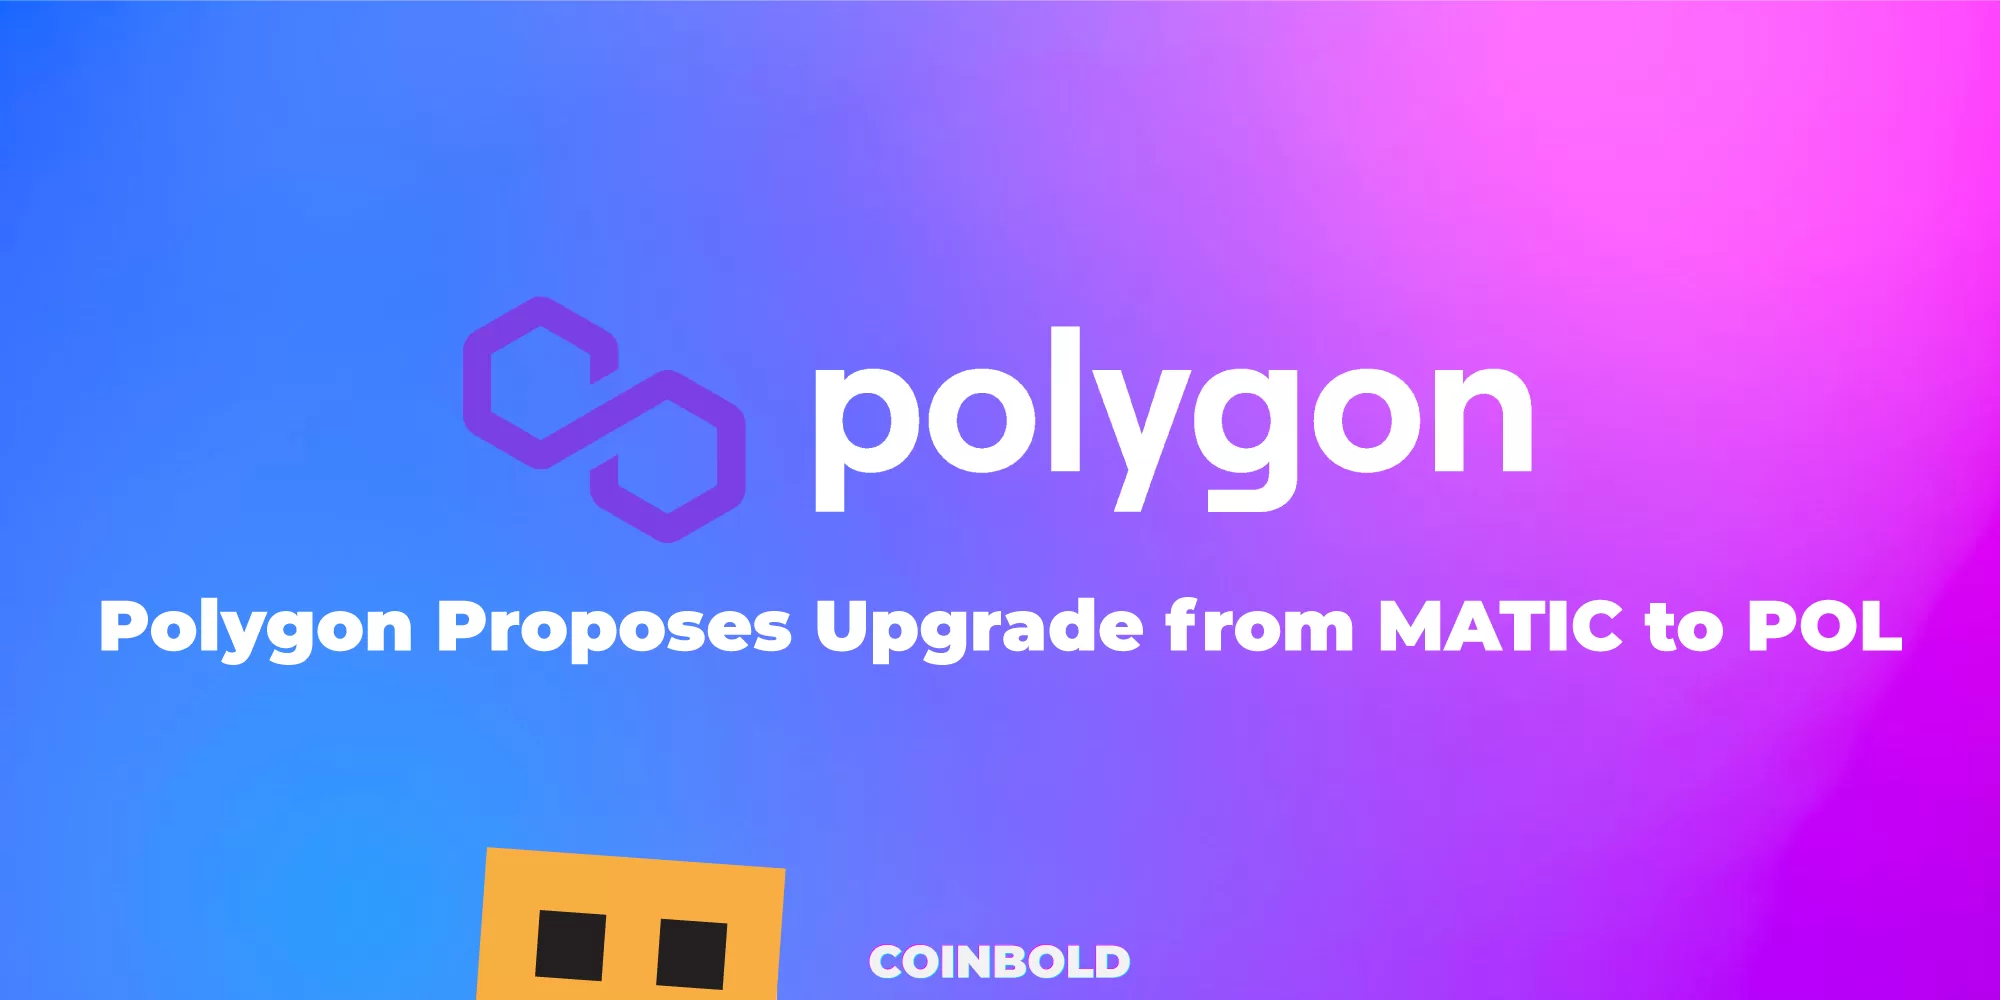 Polygon Proposes Upgrade from MATIC to POL